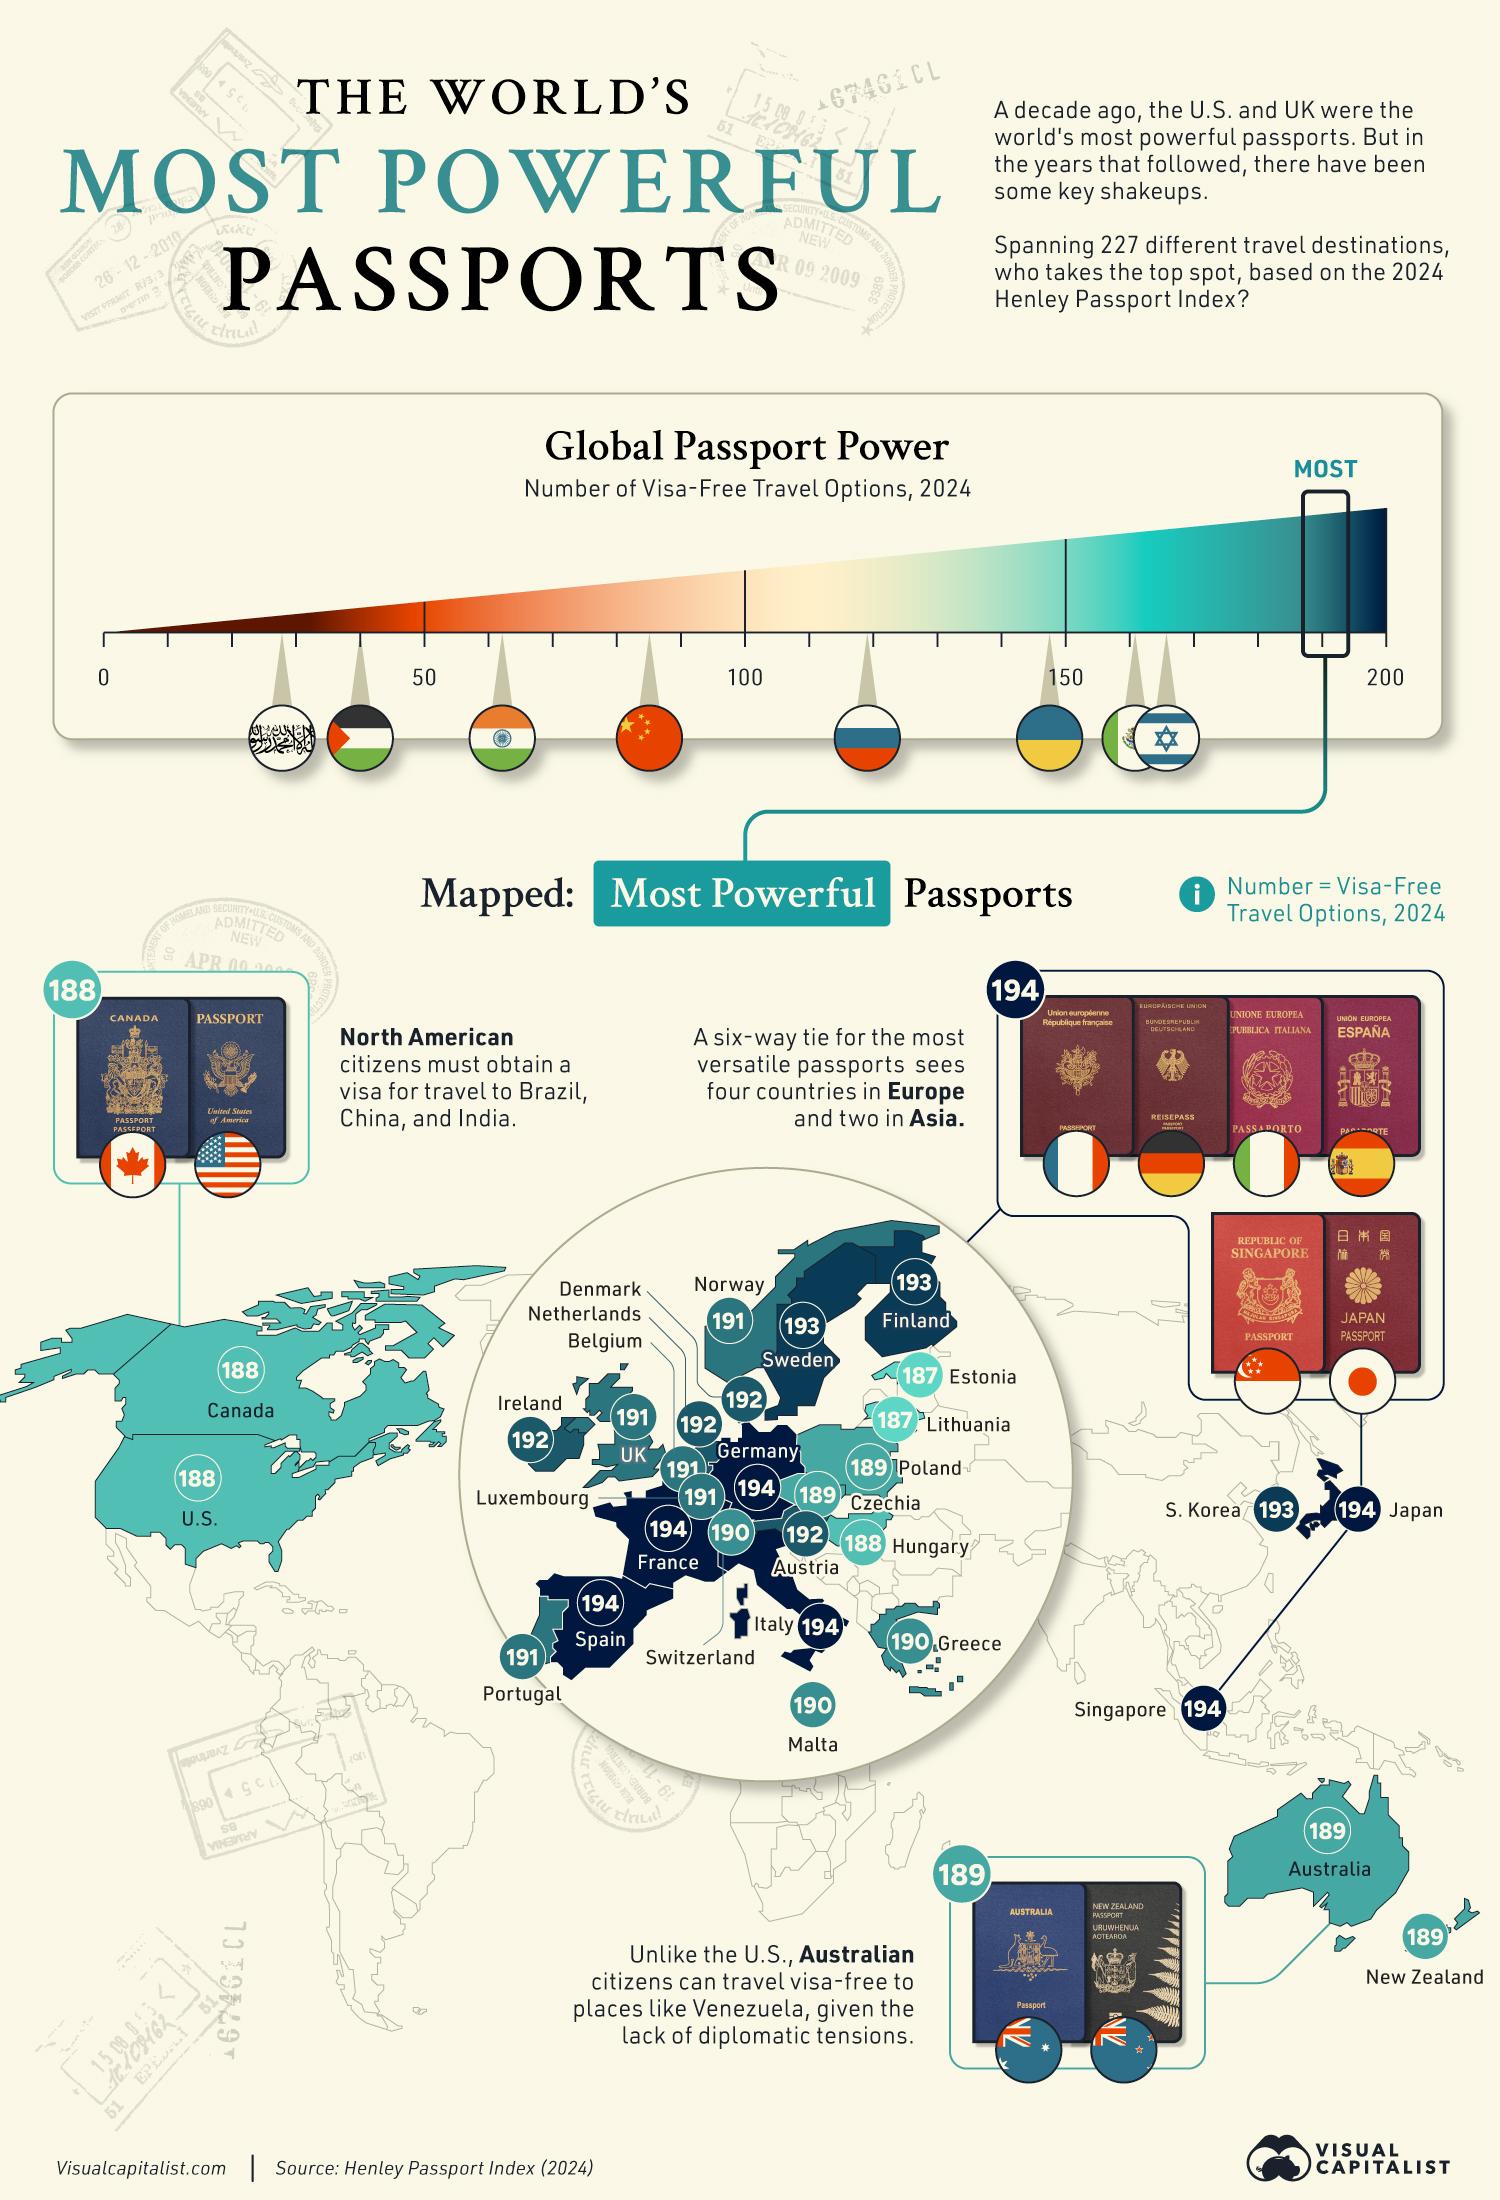 The World's Most Powerful Passports in 2024